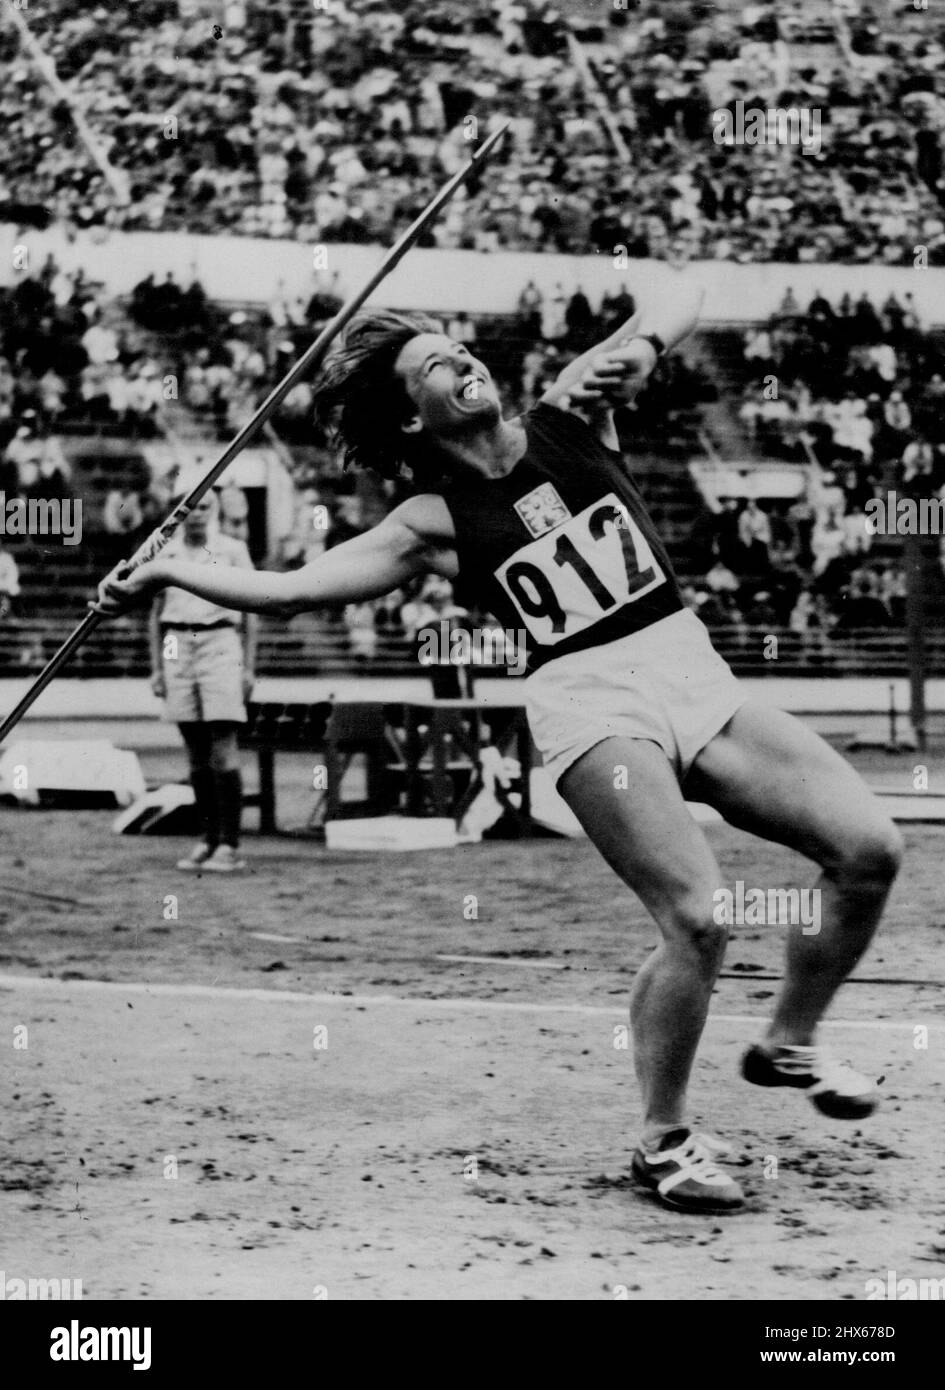 Zatopek's Wife Wins Javelin Event -- Dana Zatopkova, wife of the Czech 5,000 metres and 10,000 metres gold medal winner, throwing the javelin during that Olympic event at the Olympic Stadium. She won with a throw of 165 feet 7 inches. July 25, 1952. (Photo by Planet News Ltd.). Stock Photo